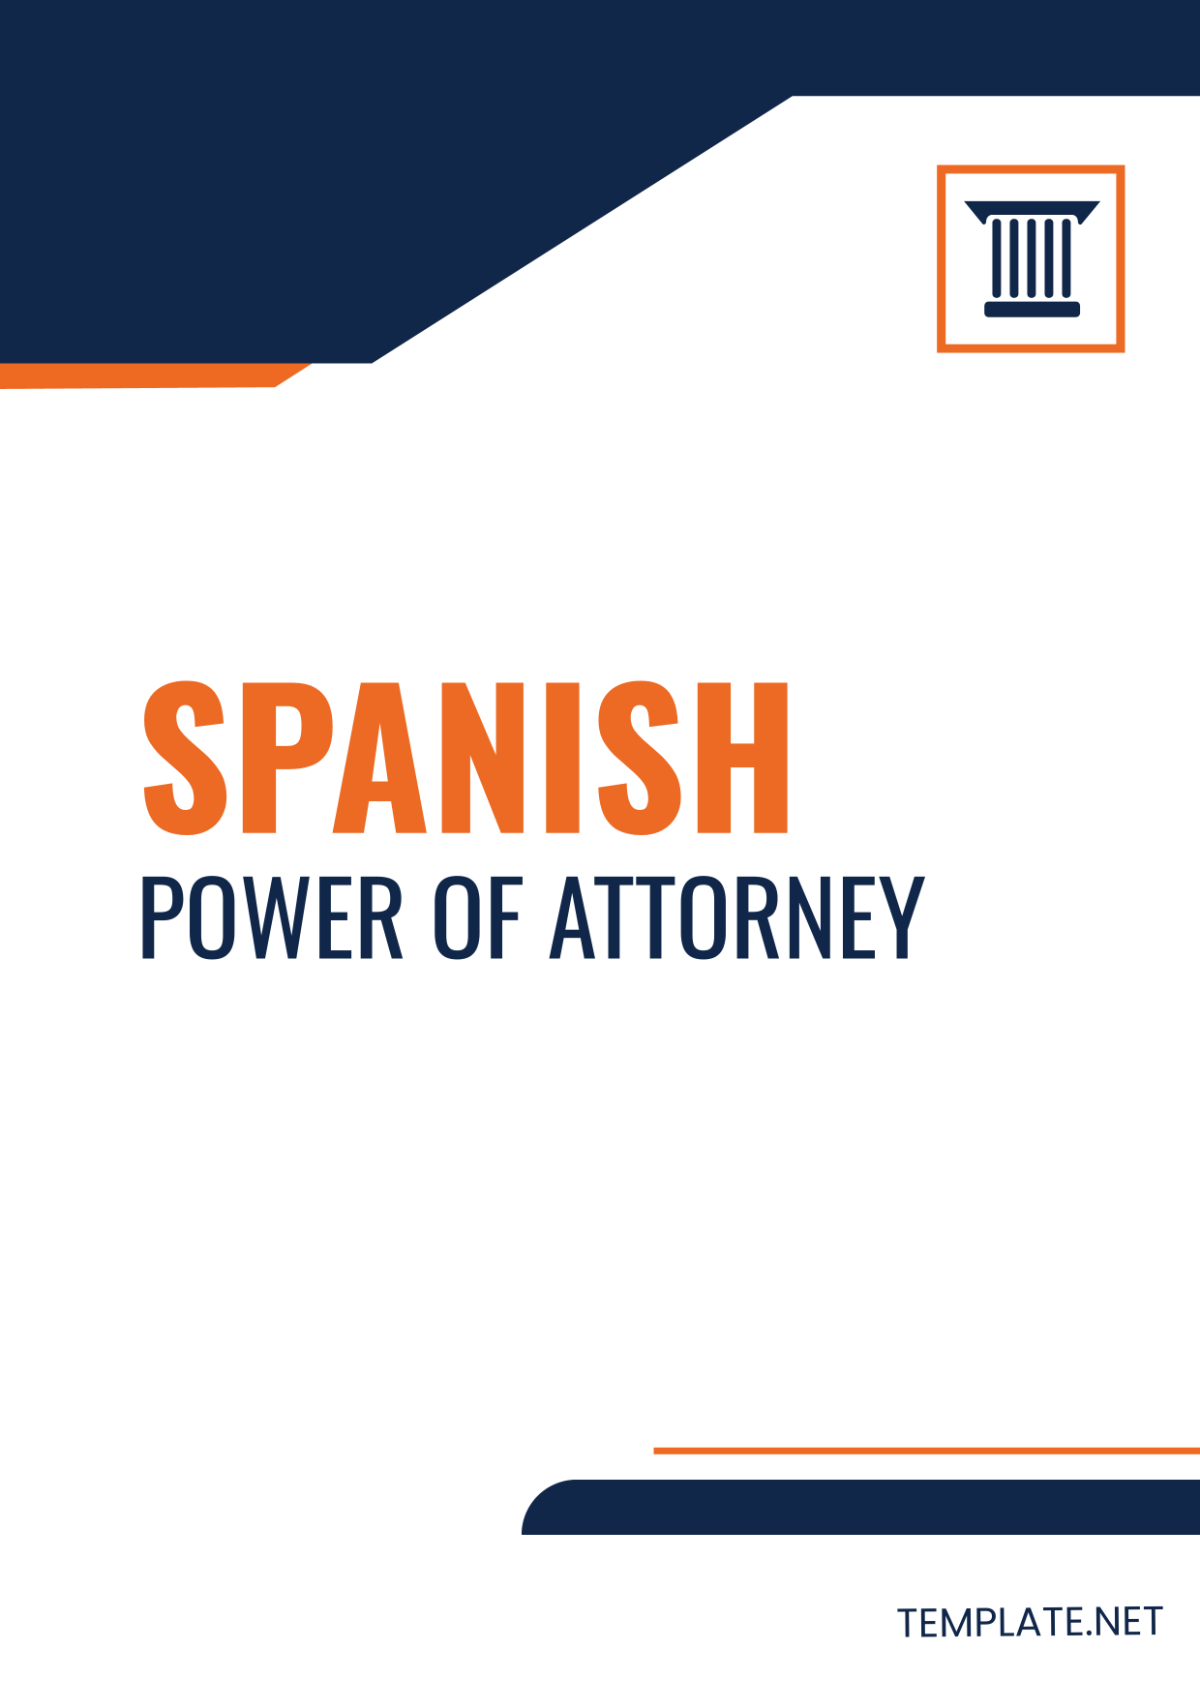 Spanish Power of Attorney Template